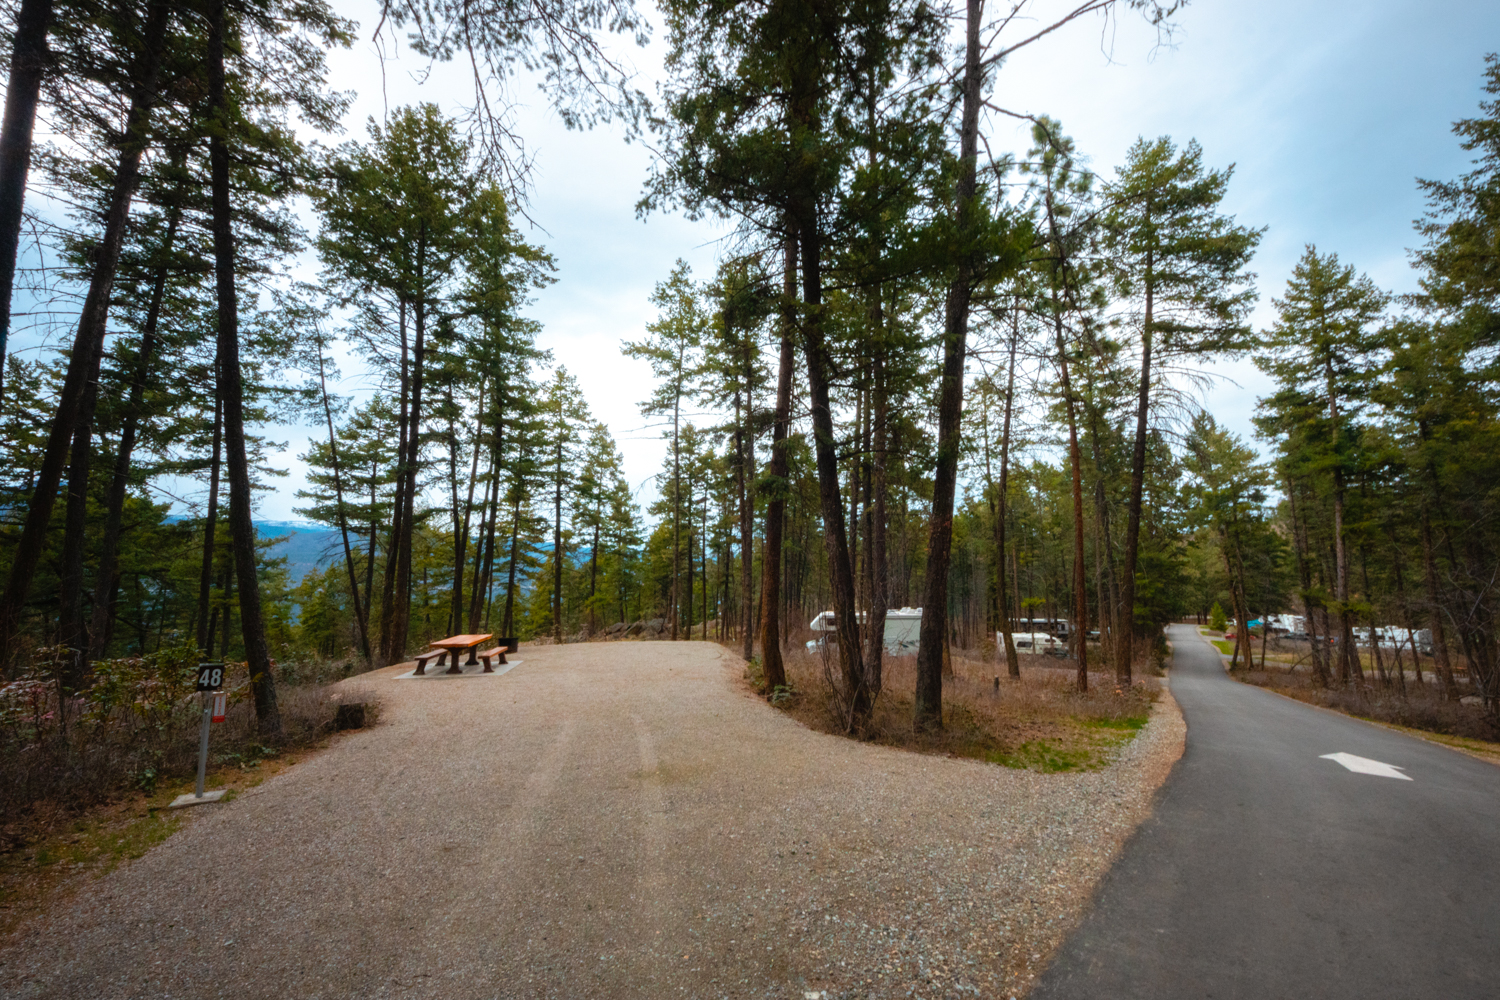 Gravel campsite and a paved road through the campground